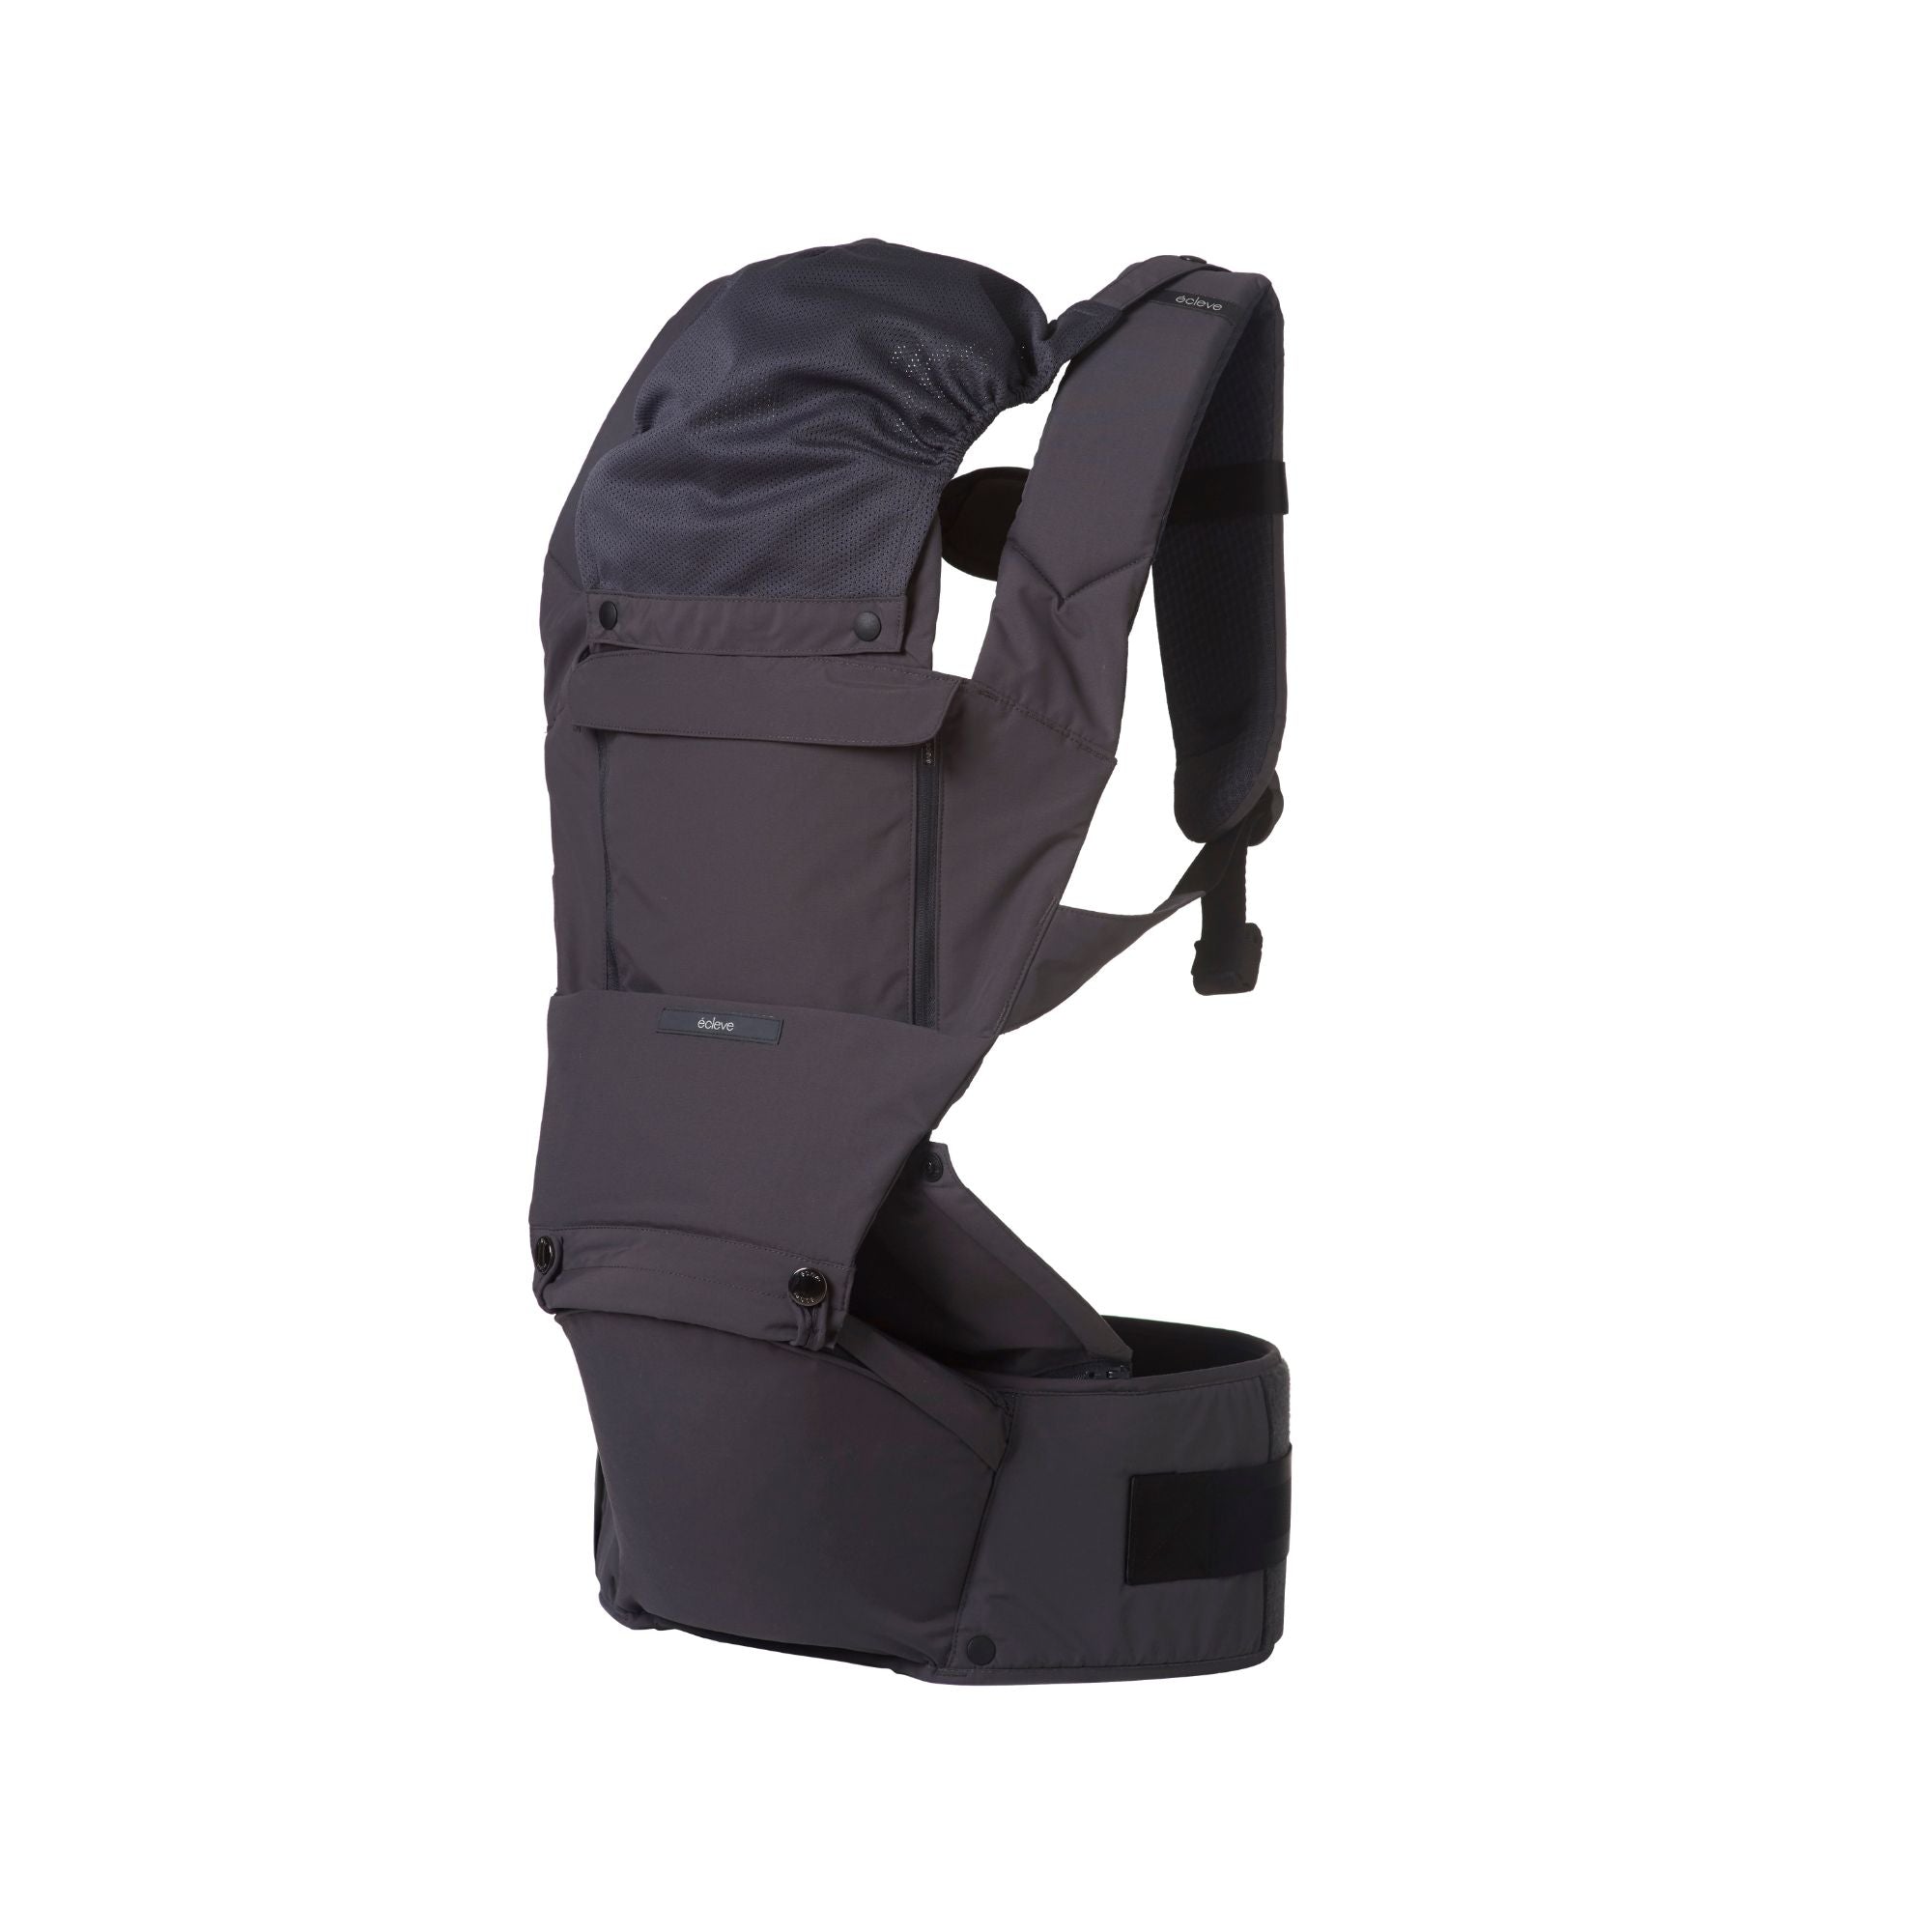 ECLEVE Ultimate Comfort Hip Seat Carrier